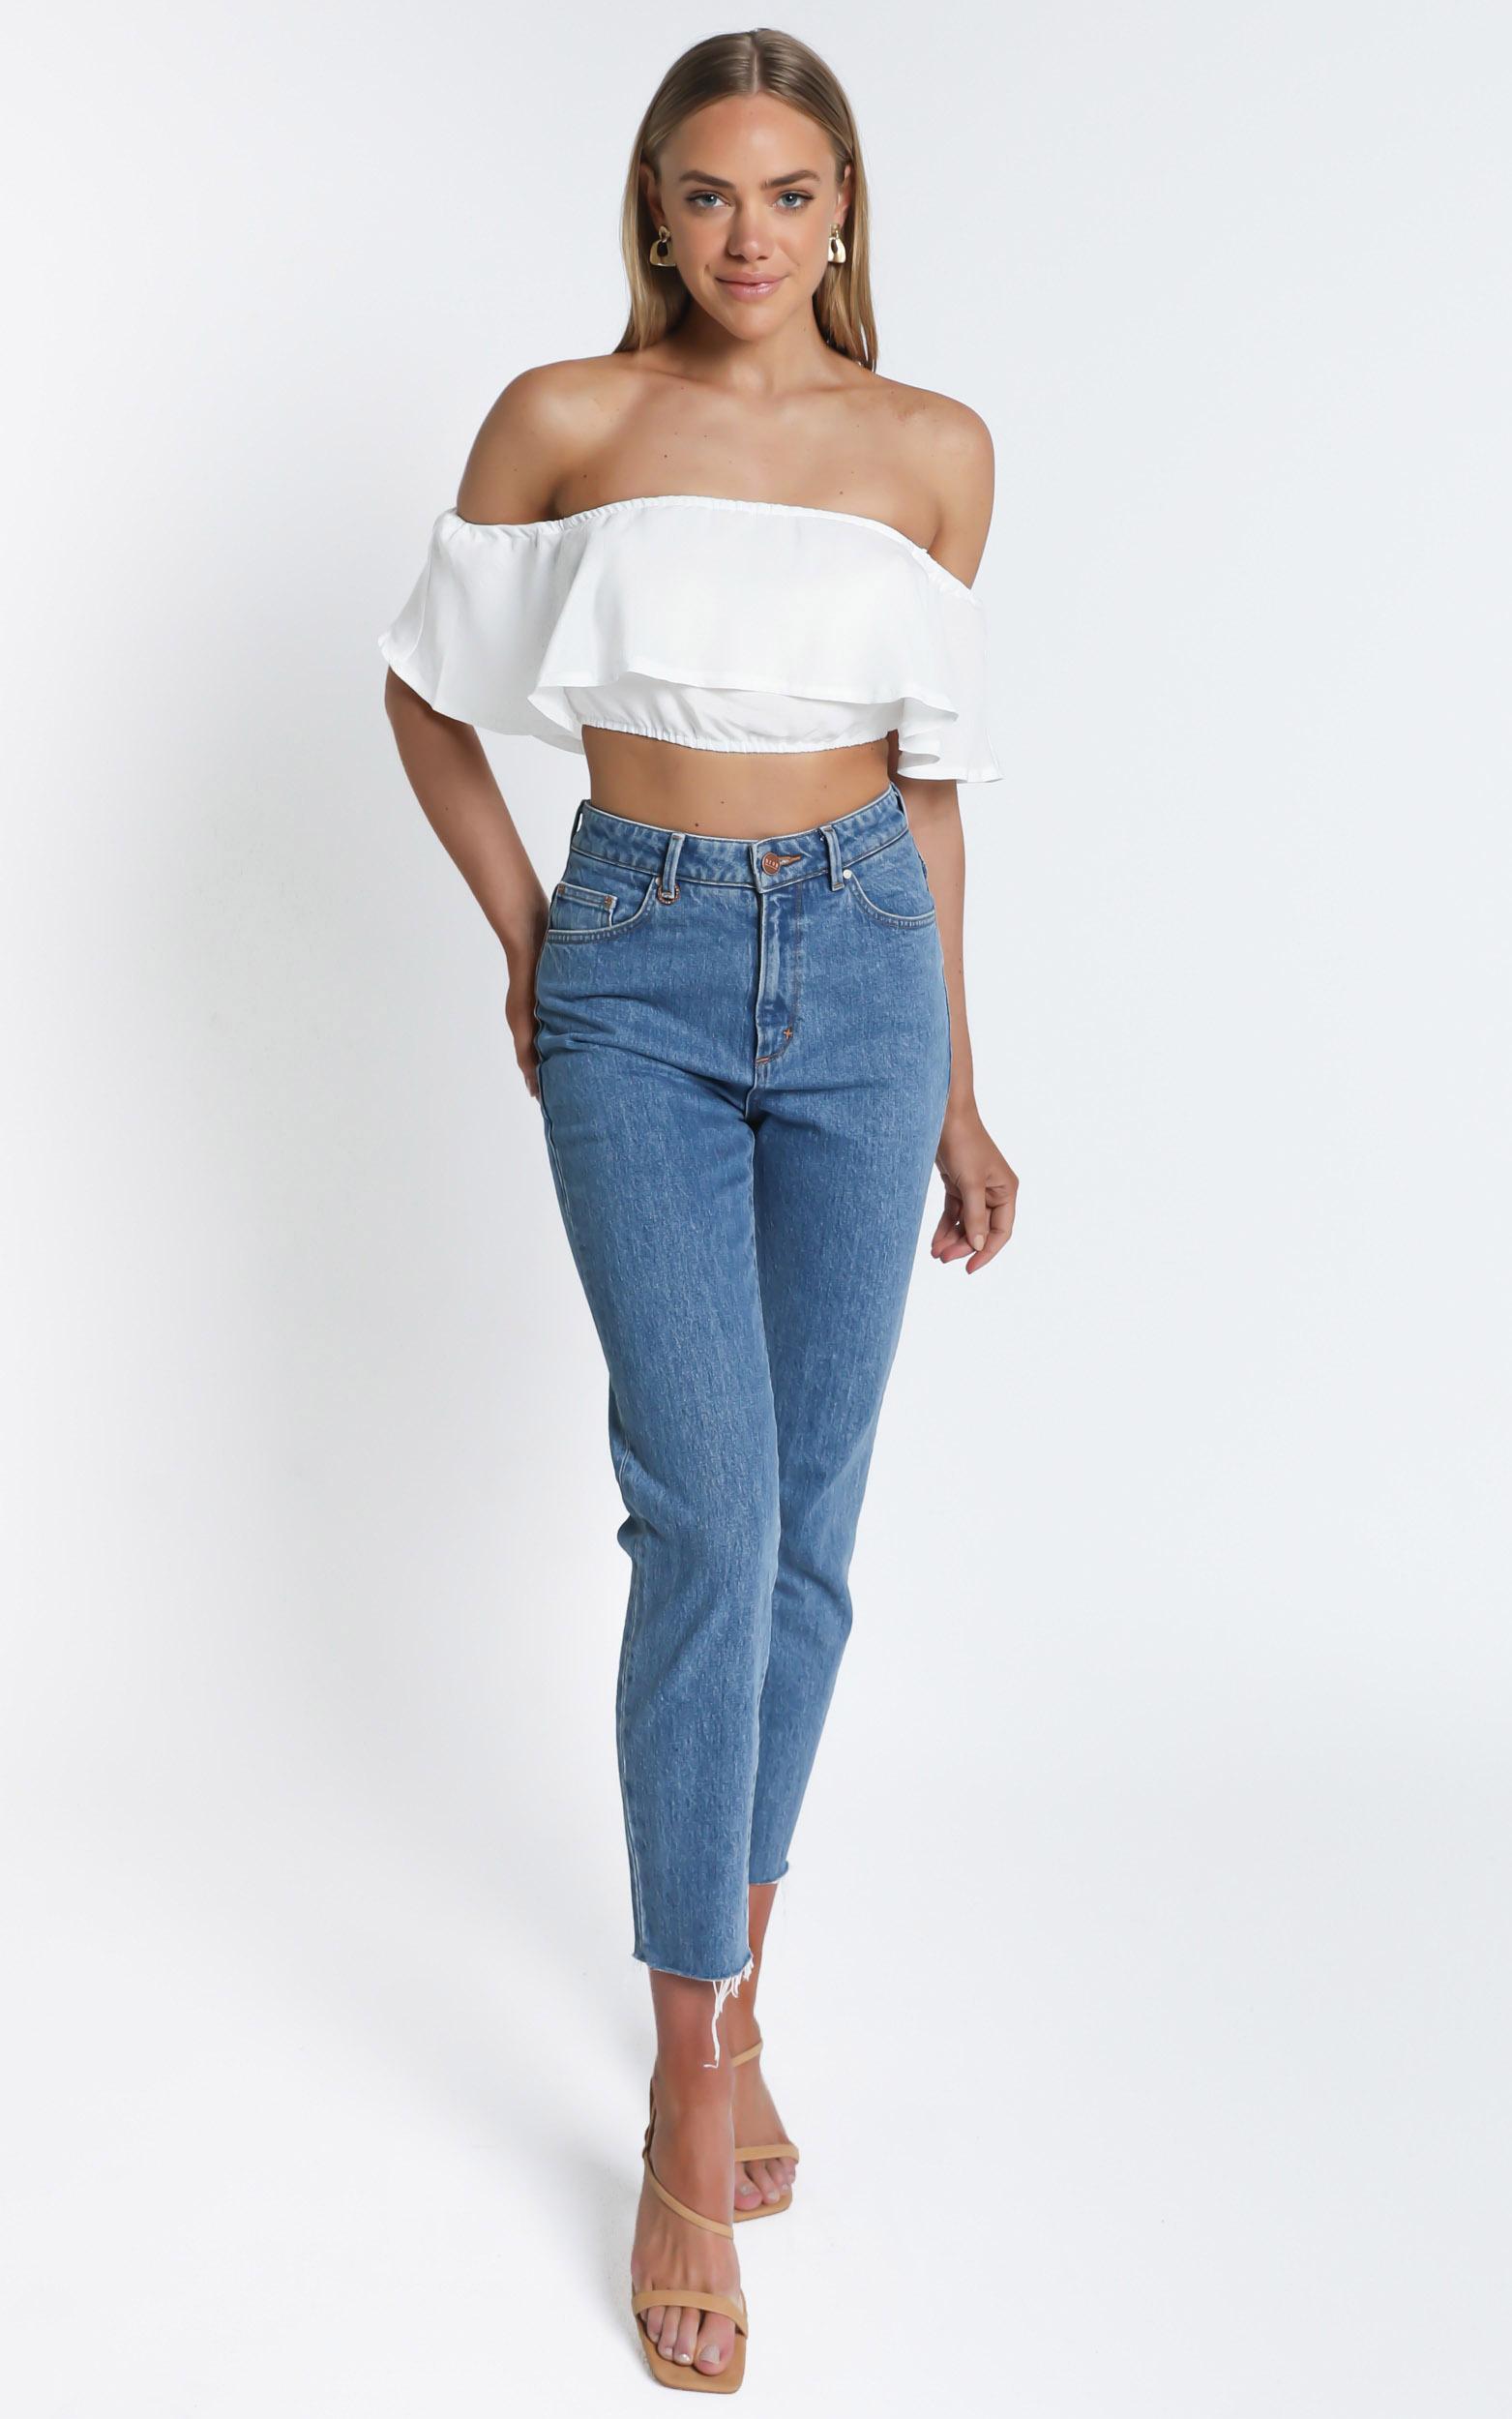 Favourite Thing Crop Top in White - 06, WHT2, hi-res image number null